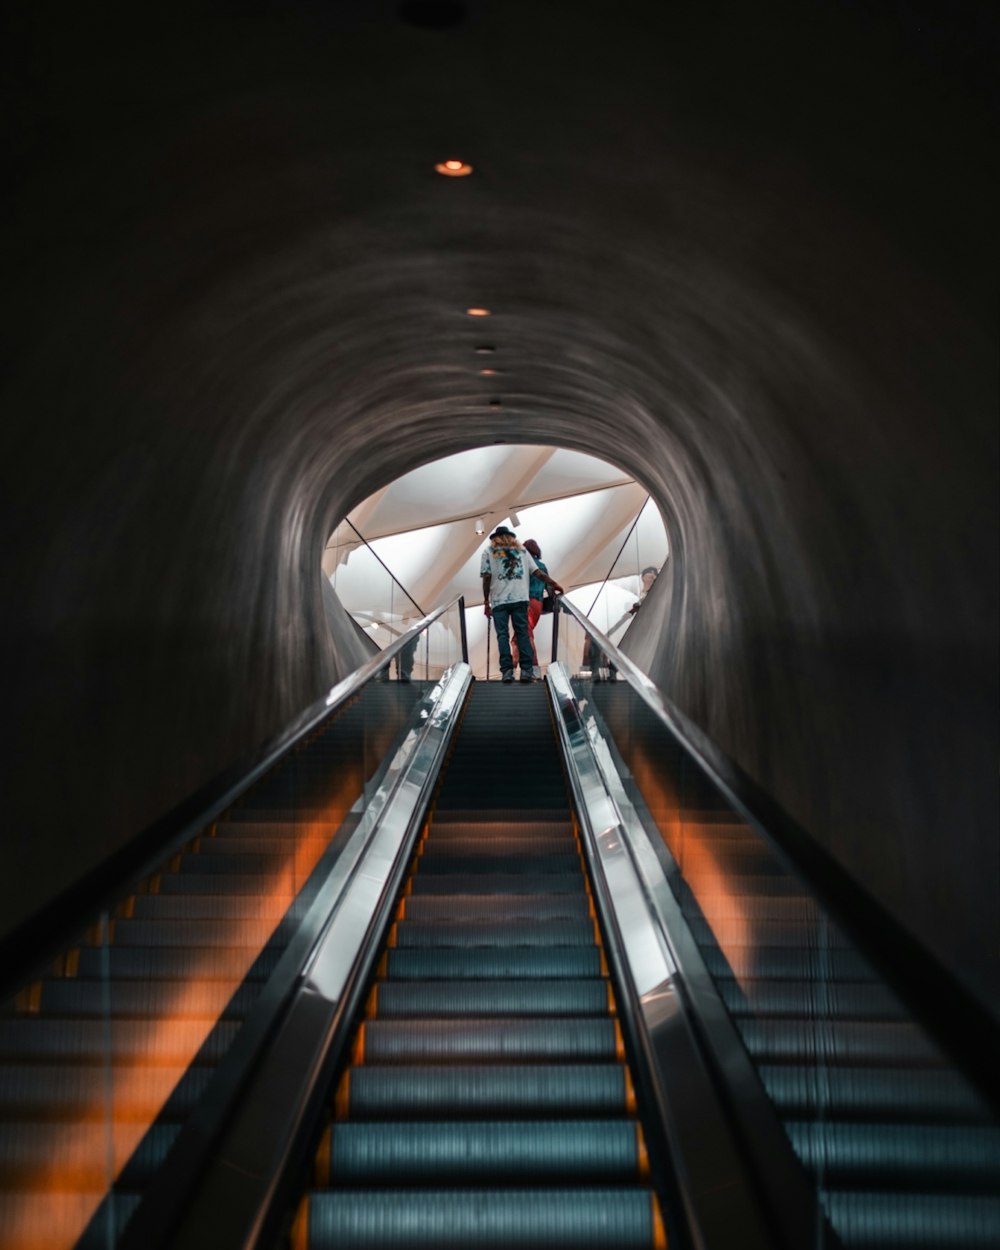 two people standing on an escalator in a tunnel